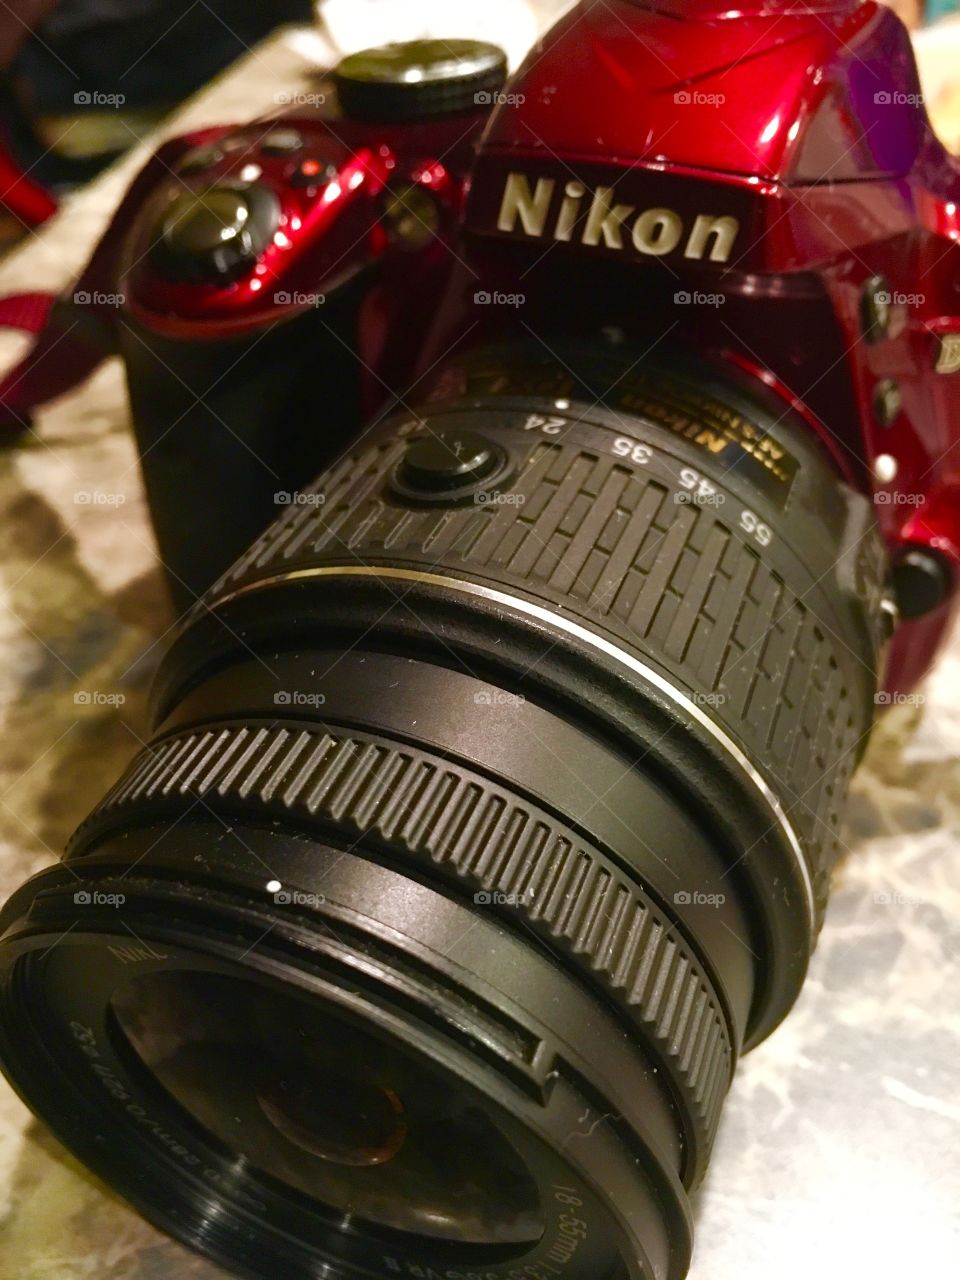 Nikon camera D3300 in red. With a. Nikkor lens